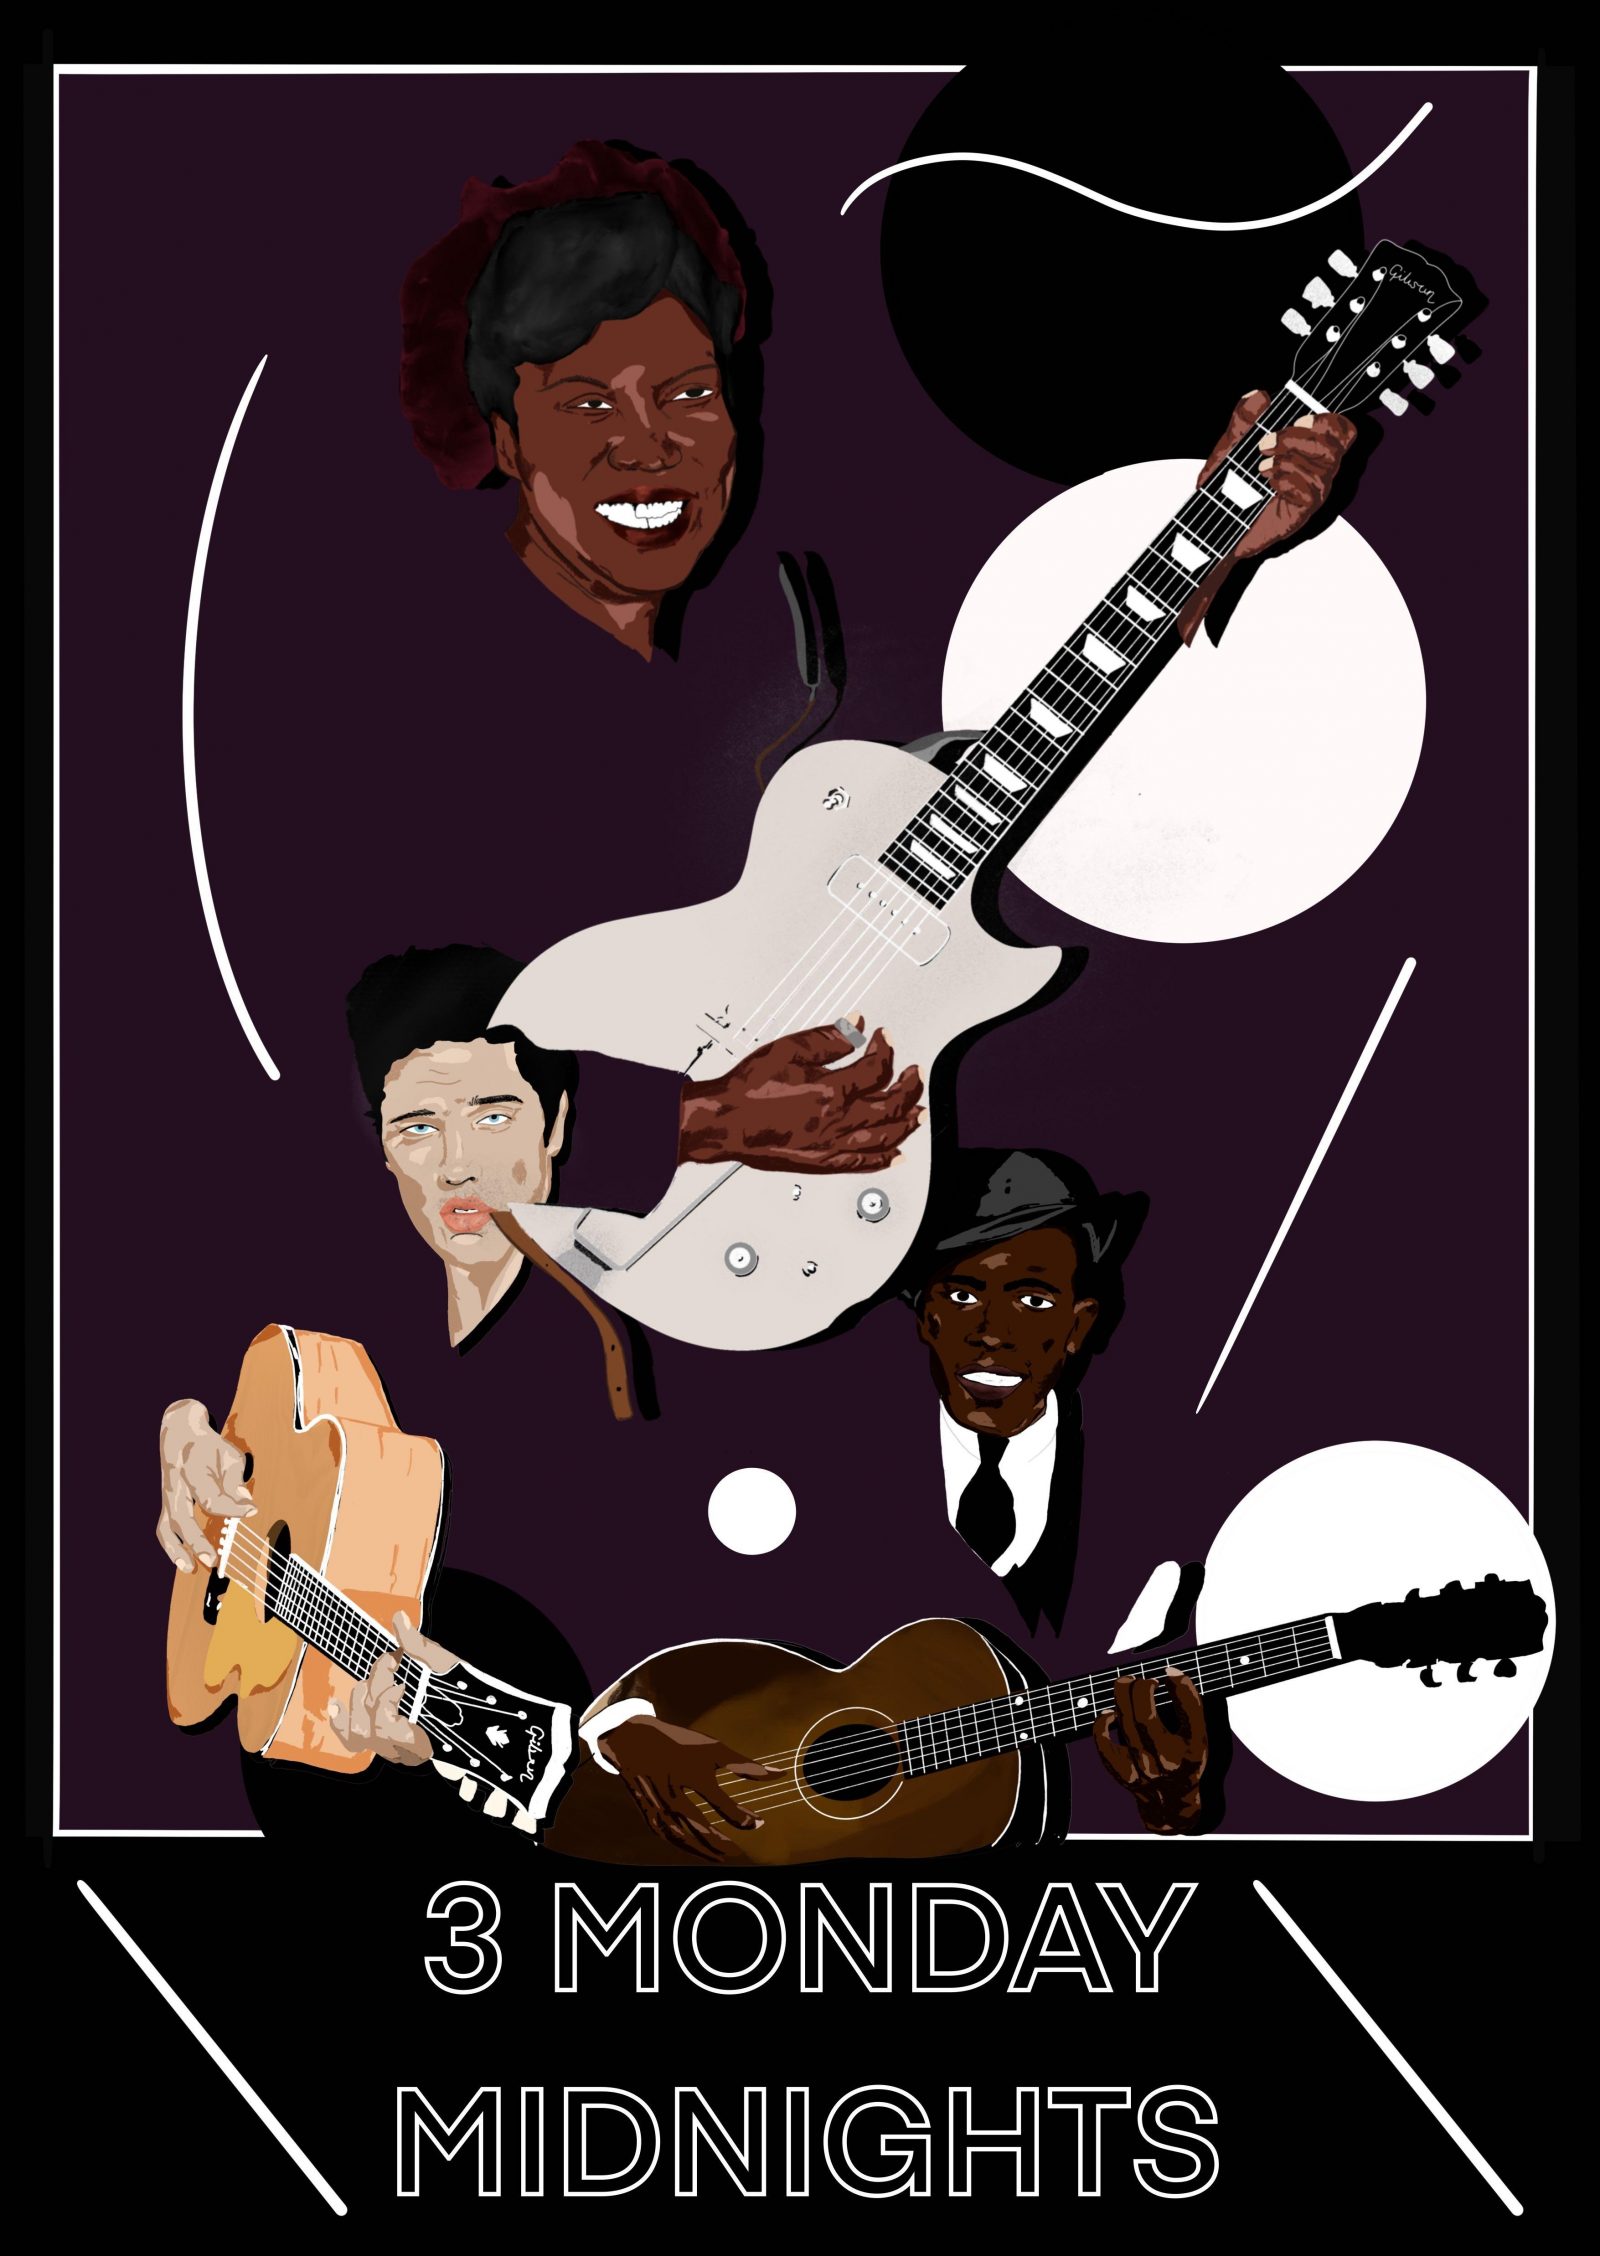 An illustrated collage of Sister Rosetta Tharpe, Robert Johnson and Elvis Presley holding guitars with the words '3 Monday Midnights' in white text underneath.